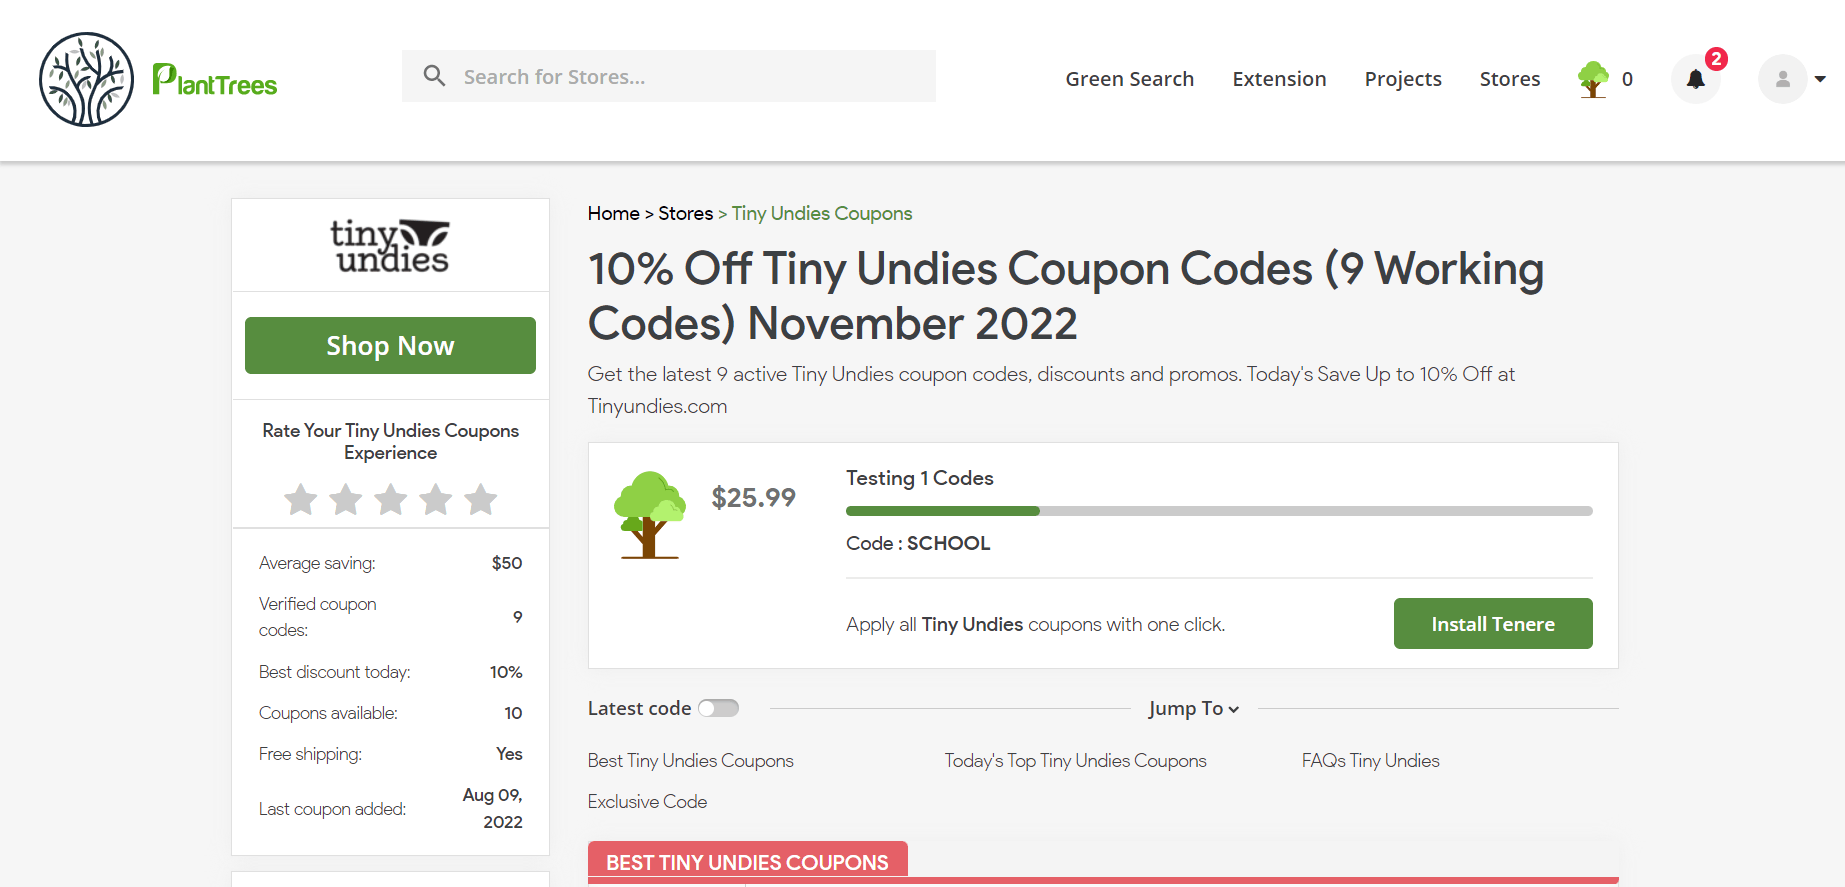 How To Use Tiny Undies Coupon Code 2